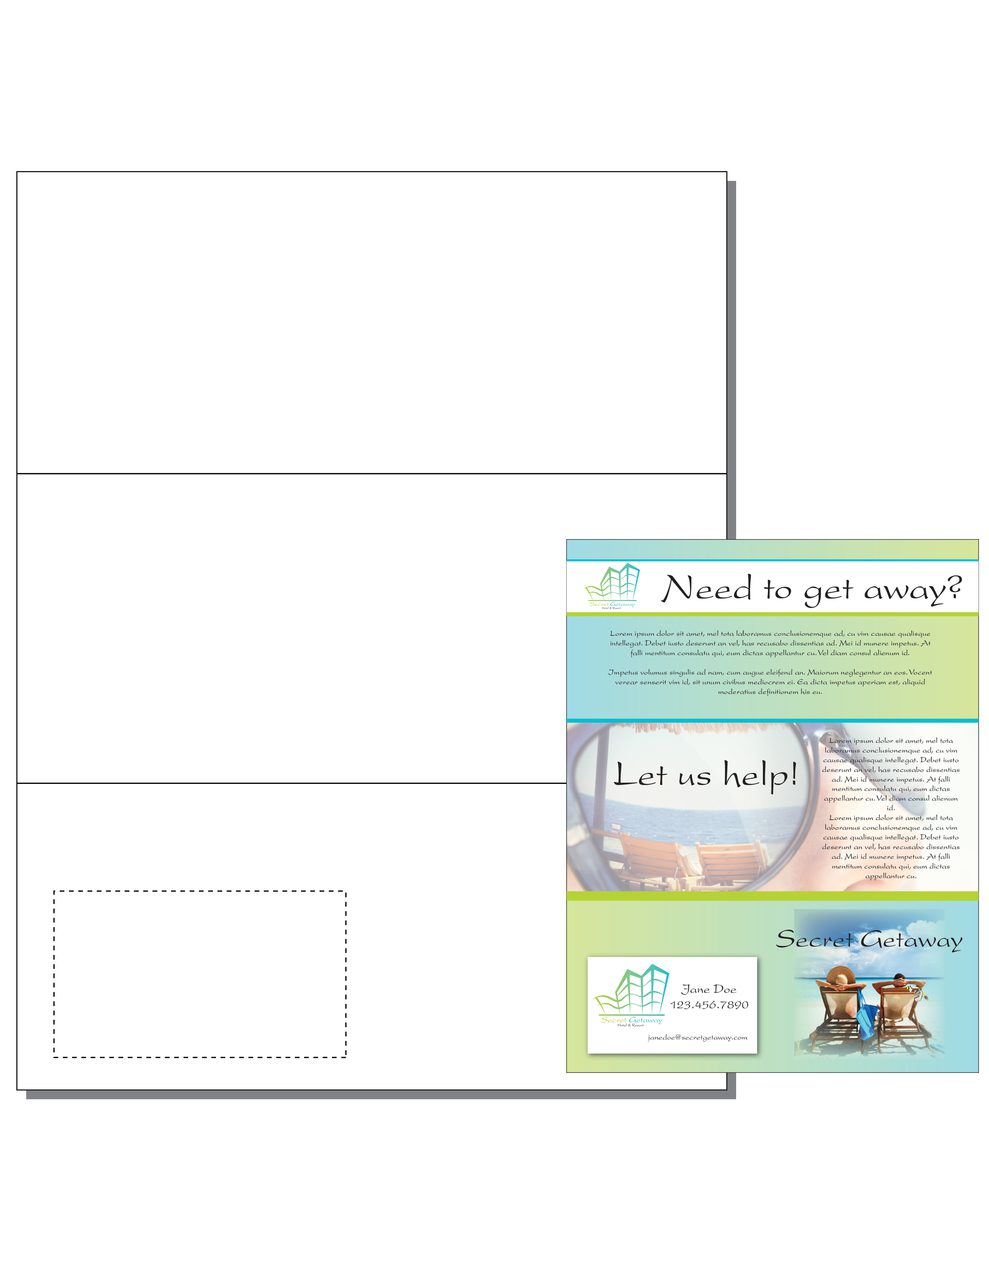 Item 115: 1 Up 3 3/4 x 8 1/2 Tri Fold Mailer with Business Card 8 1/2